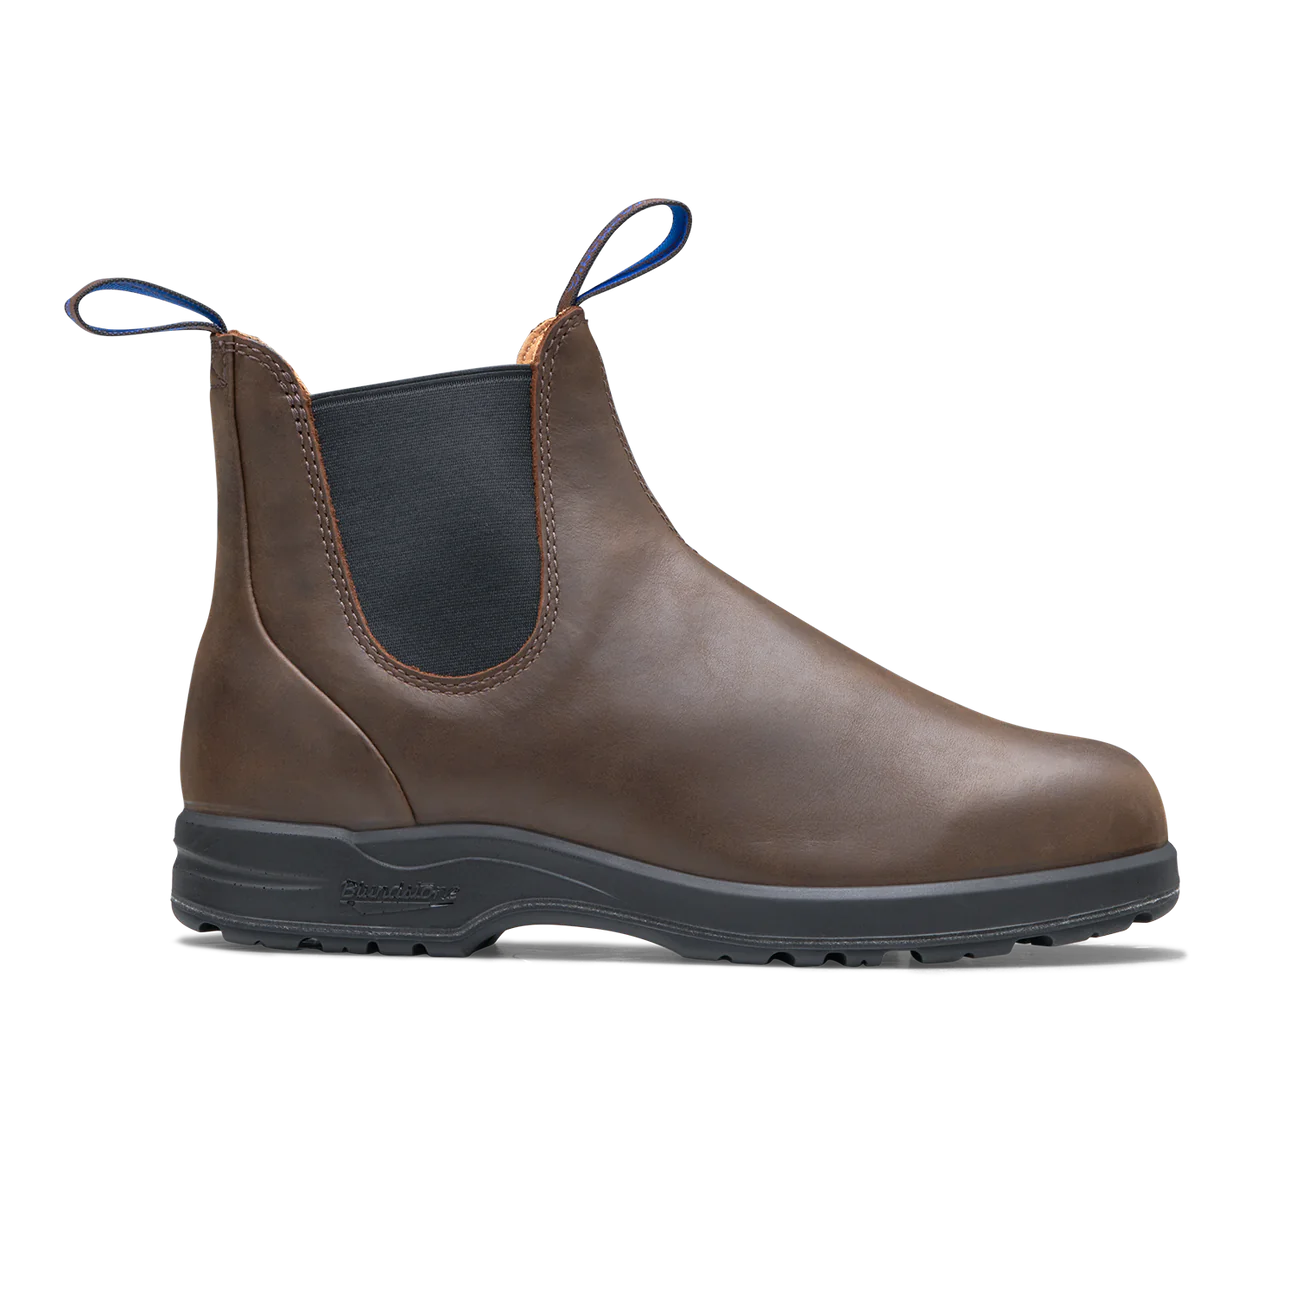 Blundstone 2250 Winter Thermal All-Terrain Boots